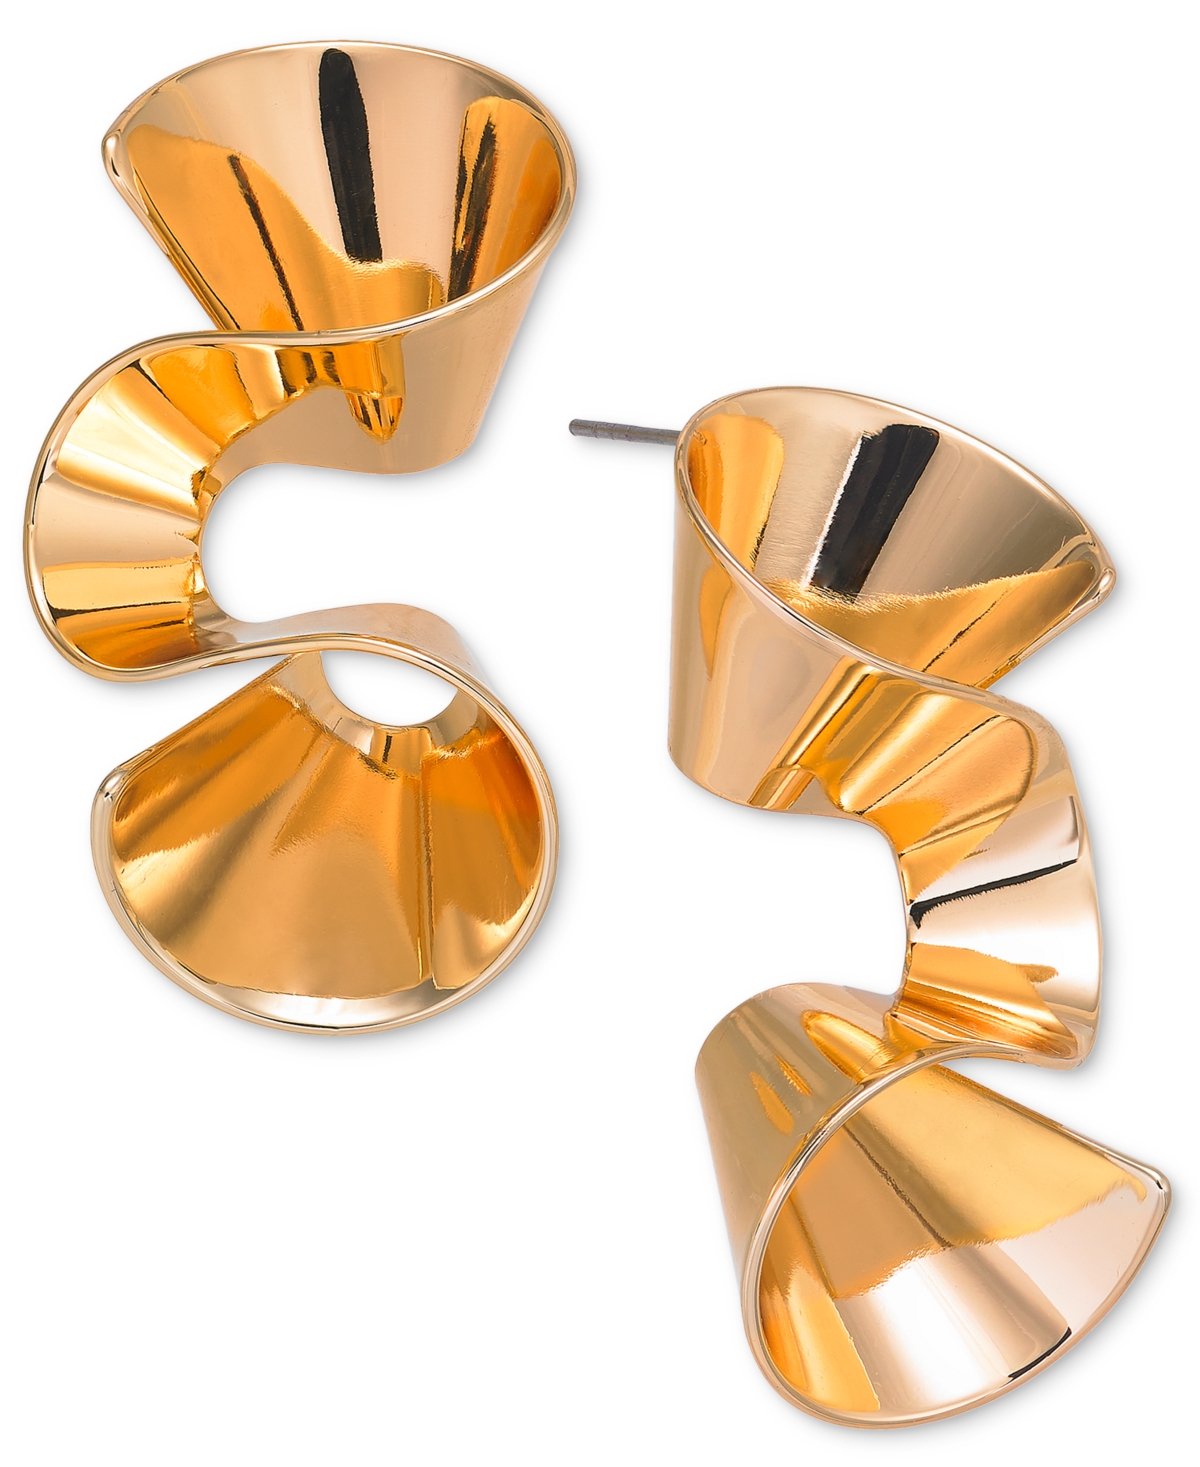 Gold-Tone Folded Drop Earrings, Created for Macy's - Gold